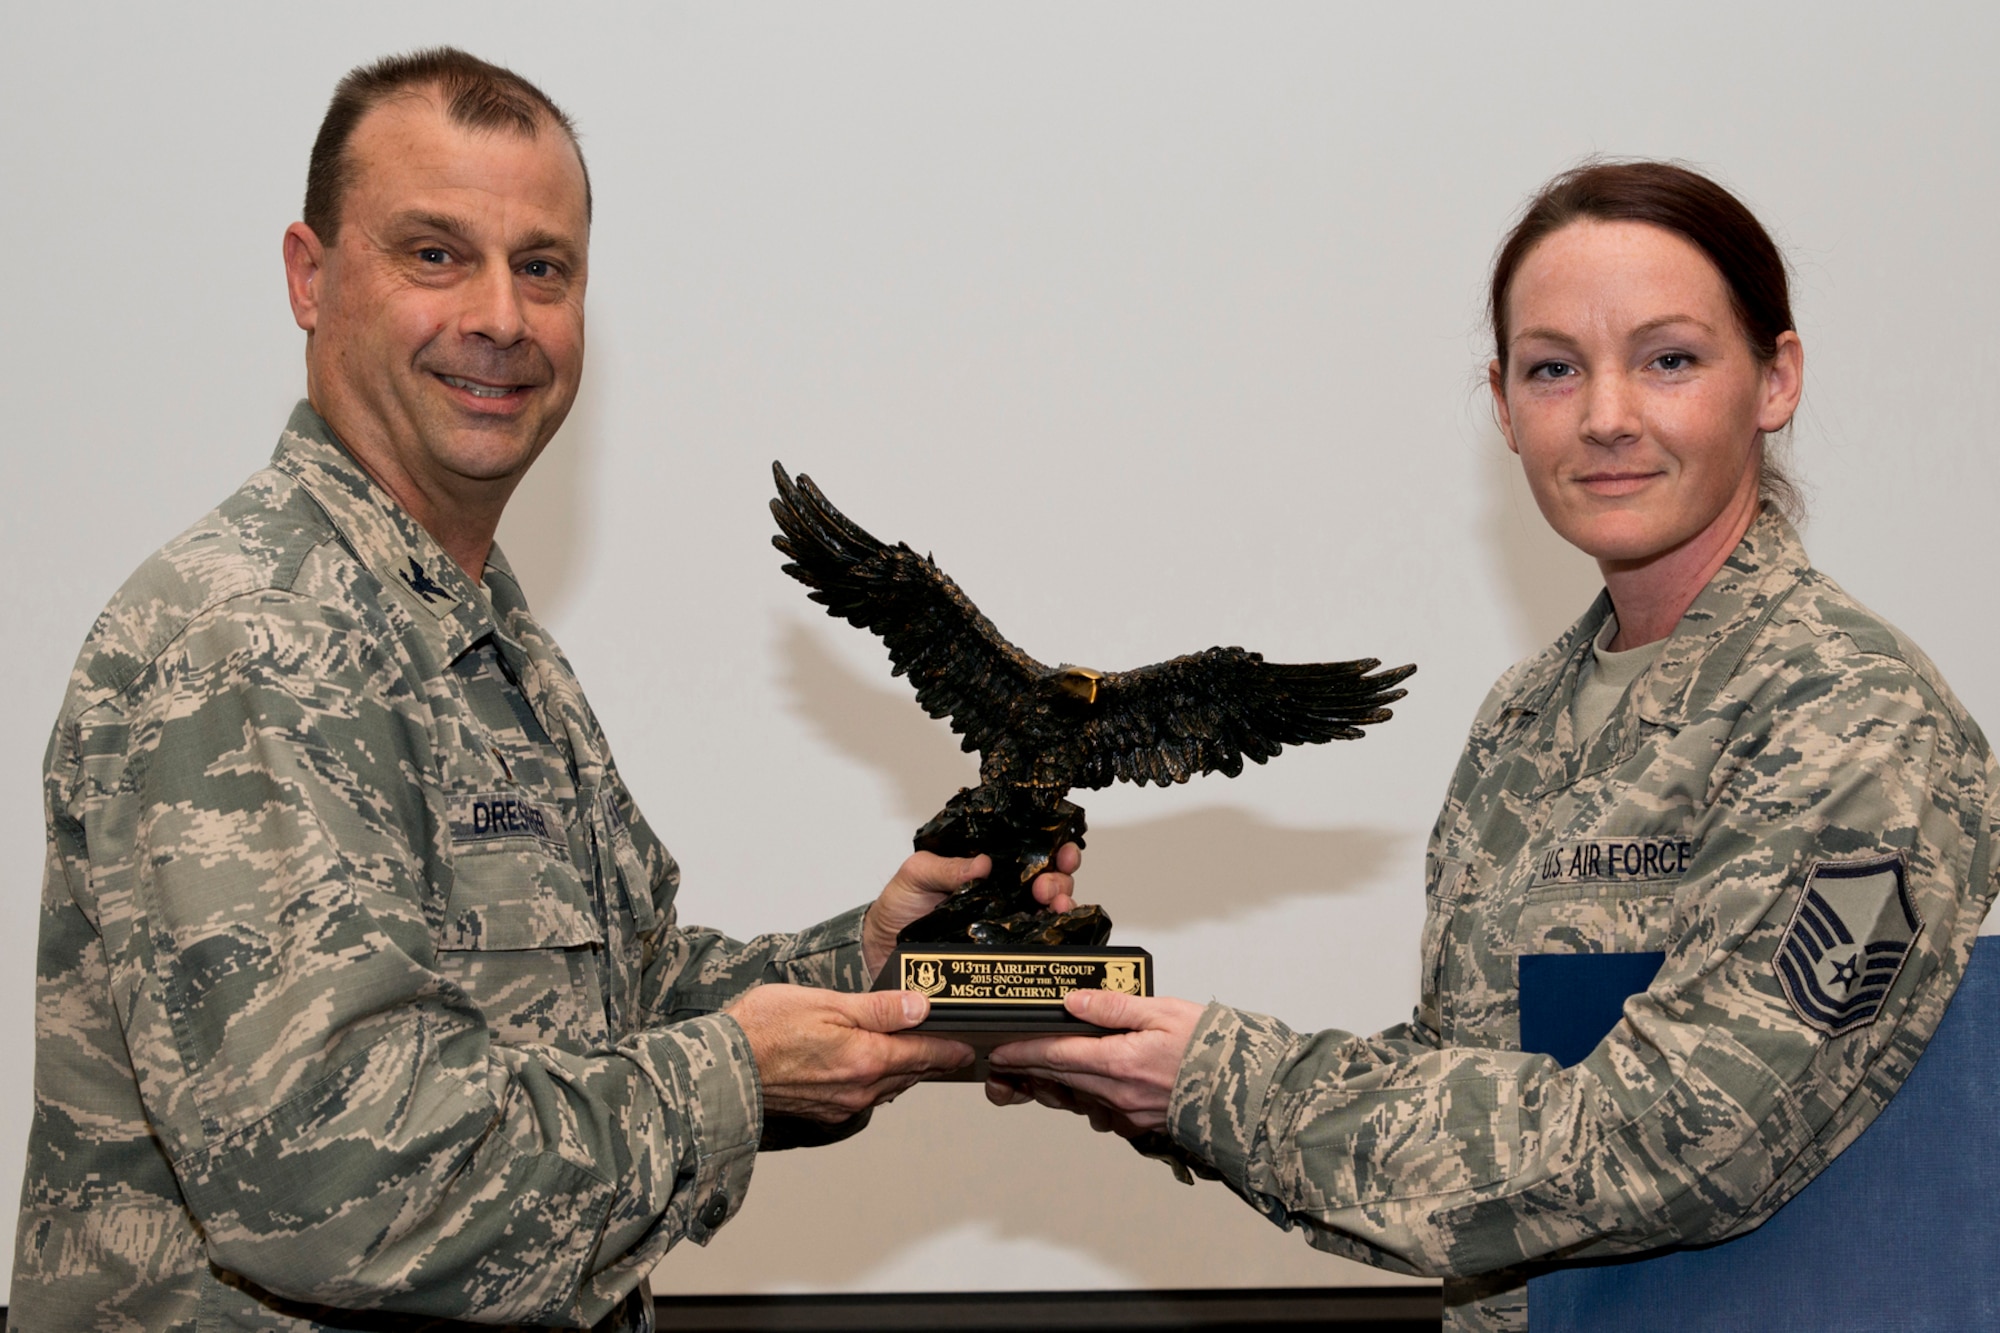 U.S. Air Force Reserve Col. Craig Drescher, commander, 913th Airlift Group, and Master Sgt. Cathryn Rock, a dedicated crew chief assigned to the 913th Maintenance Squadron, pose for a photo during a commander’s call at Little Rock Air Force Base, Ark., Mar. 13, 2016. Rock was presented the 2015 Senior Non-commissioned Officer of the Year award for the 913 AG. (U.S. Air Force photo by Master Sgt. Jeff Walston/Released)